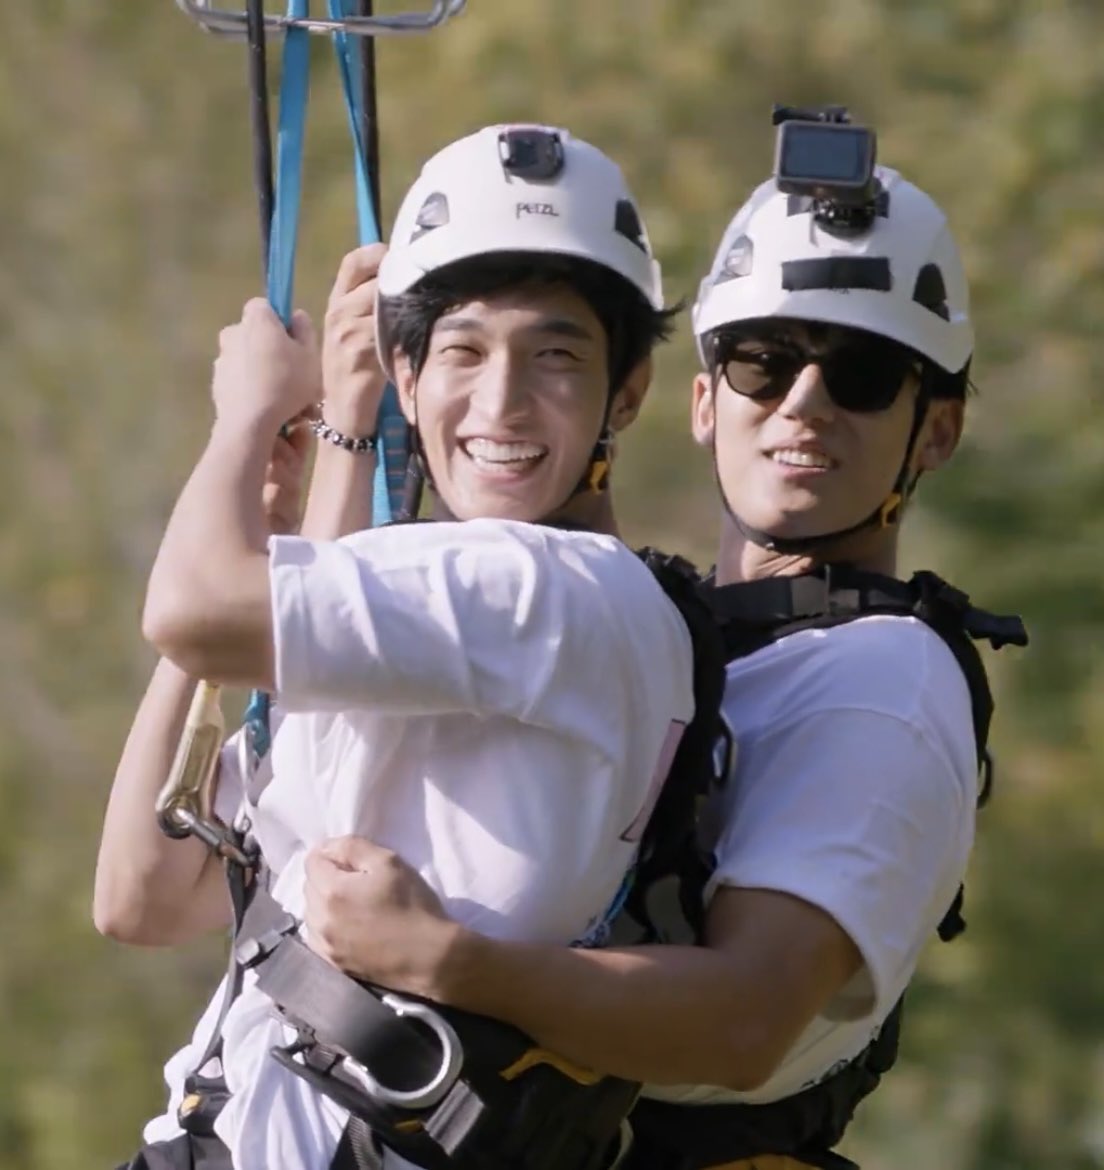 Dokyeom & mingyu were actually really scared to ride the zipline, but it was amazing that they both overcame their fear and went ziplining together. Their bright smiles before and after they rode the zipline🥹
They made each other feel safe..

Before                         After